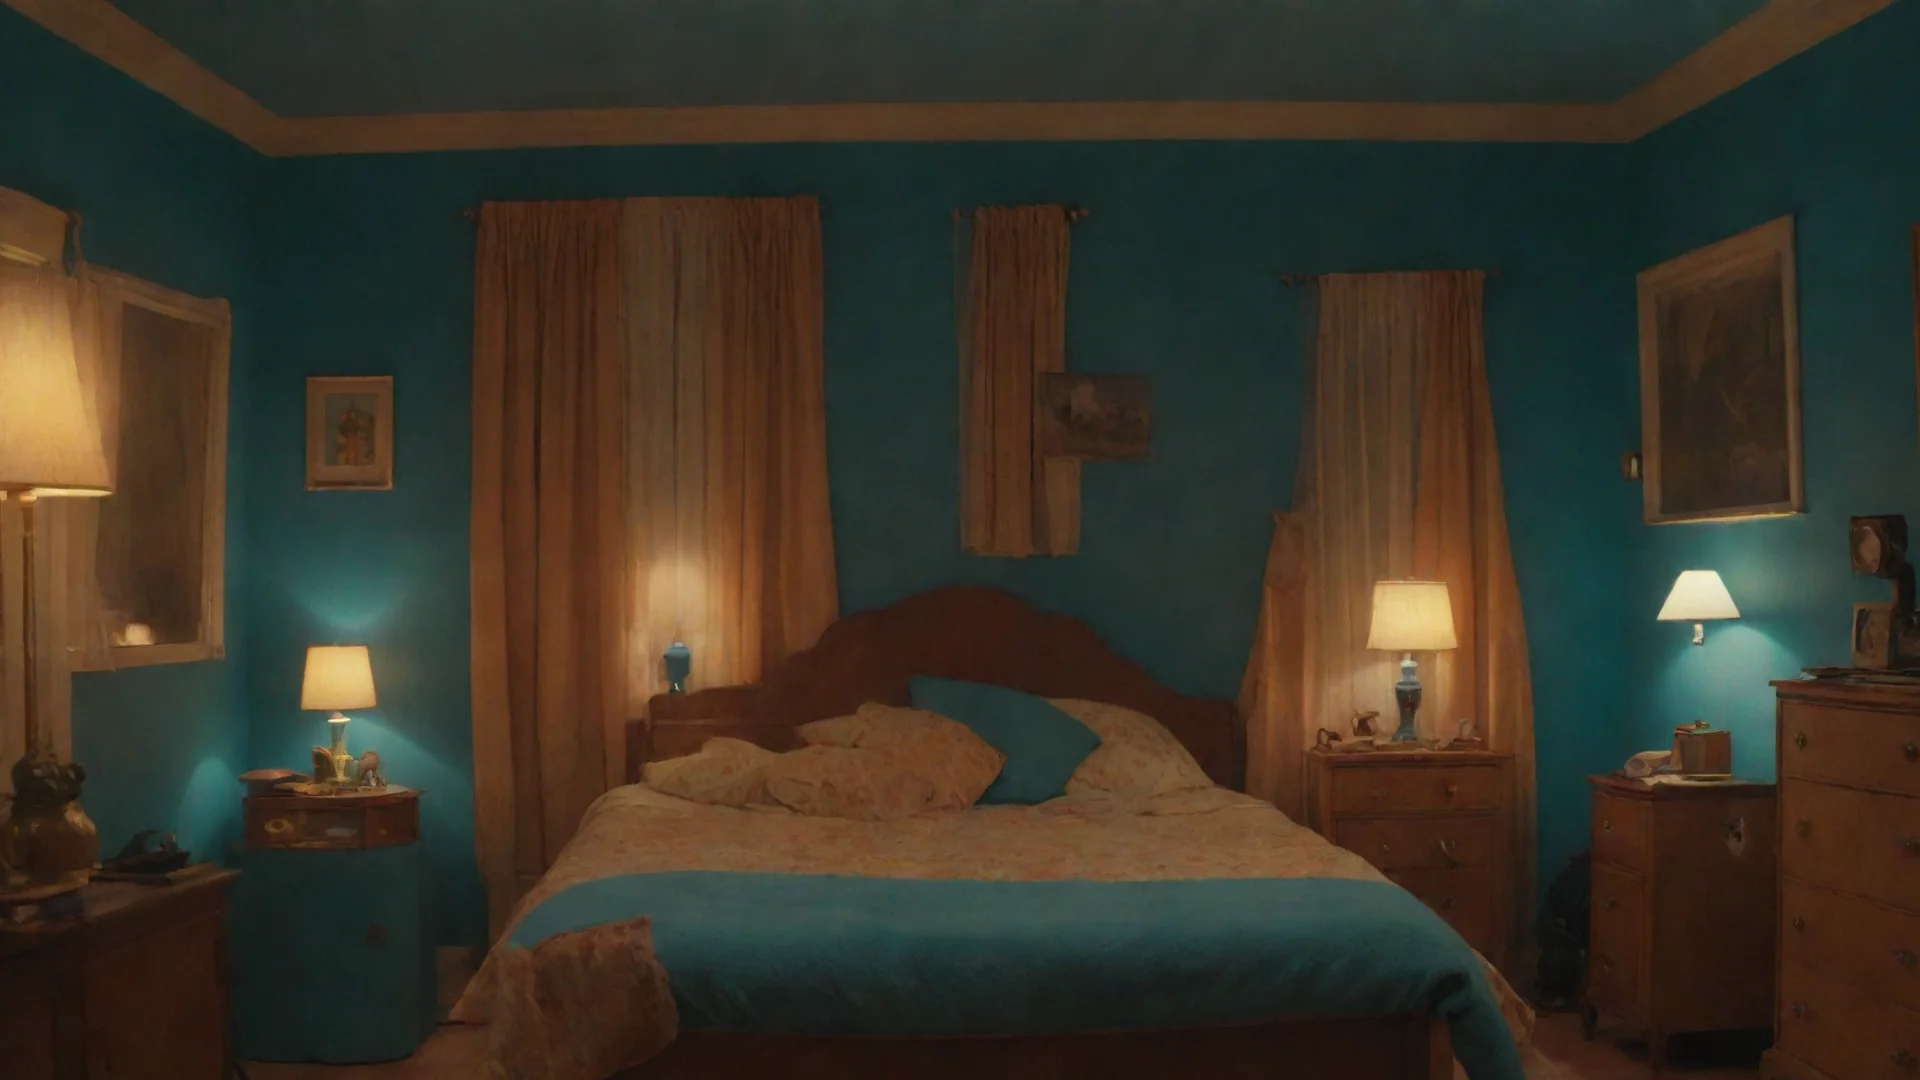 amazing wes anderson bedroom night blu light awesome portrait 2 wide